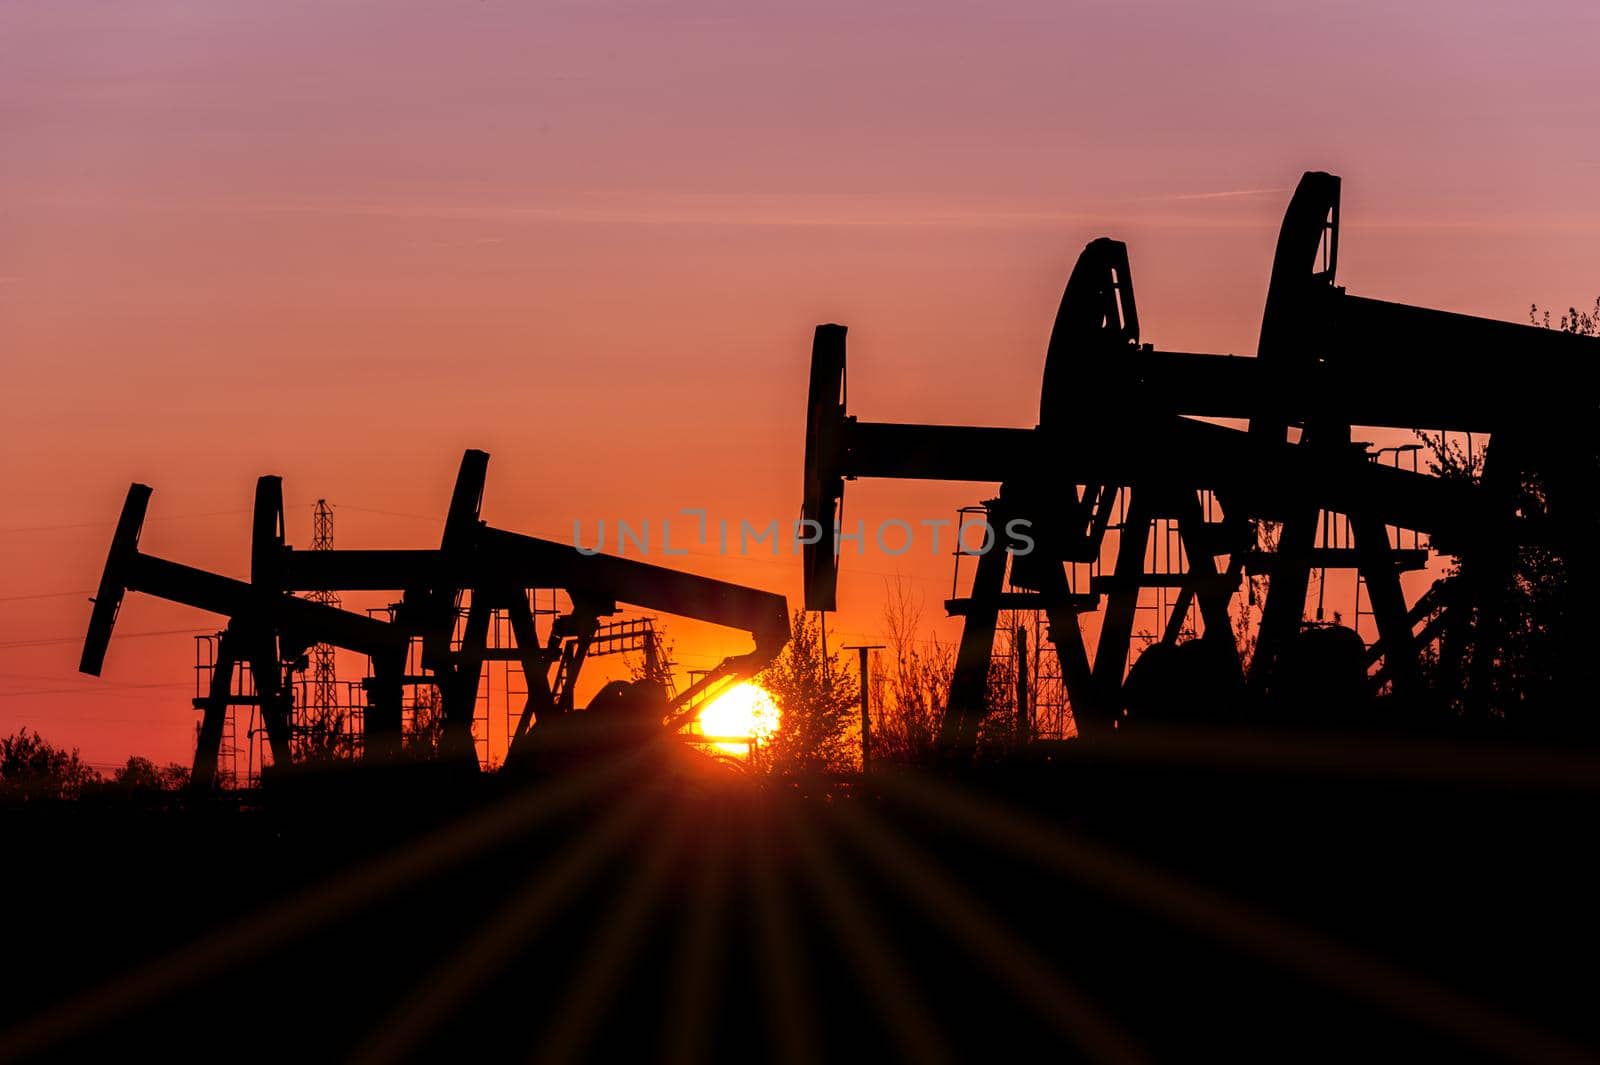 Oil pump jacks on a oilfield at sunset sky background. Concept oil and gas industry.